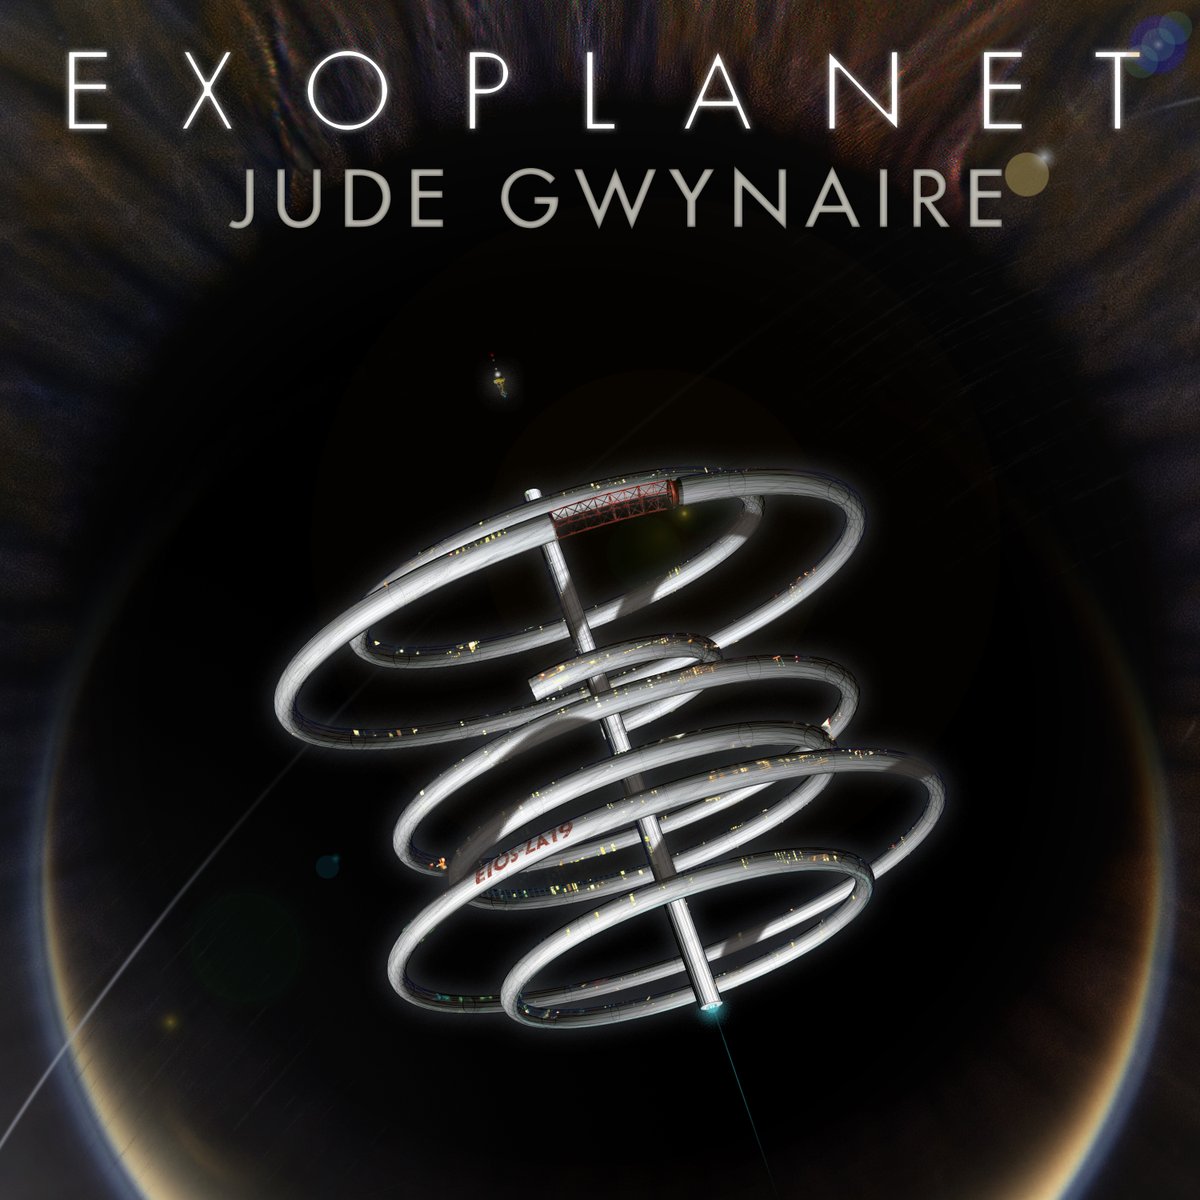 Here's a great sci-fi soundscape entitled 'Exoplanet'! Stream or buy from my website at: judegwynaire.com 🎹 open.spotify.com/album/0UcNKFaS…… #music #soundscapes #outerspace #film #deepspace #exoplanet #alien